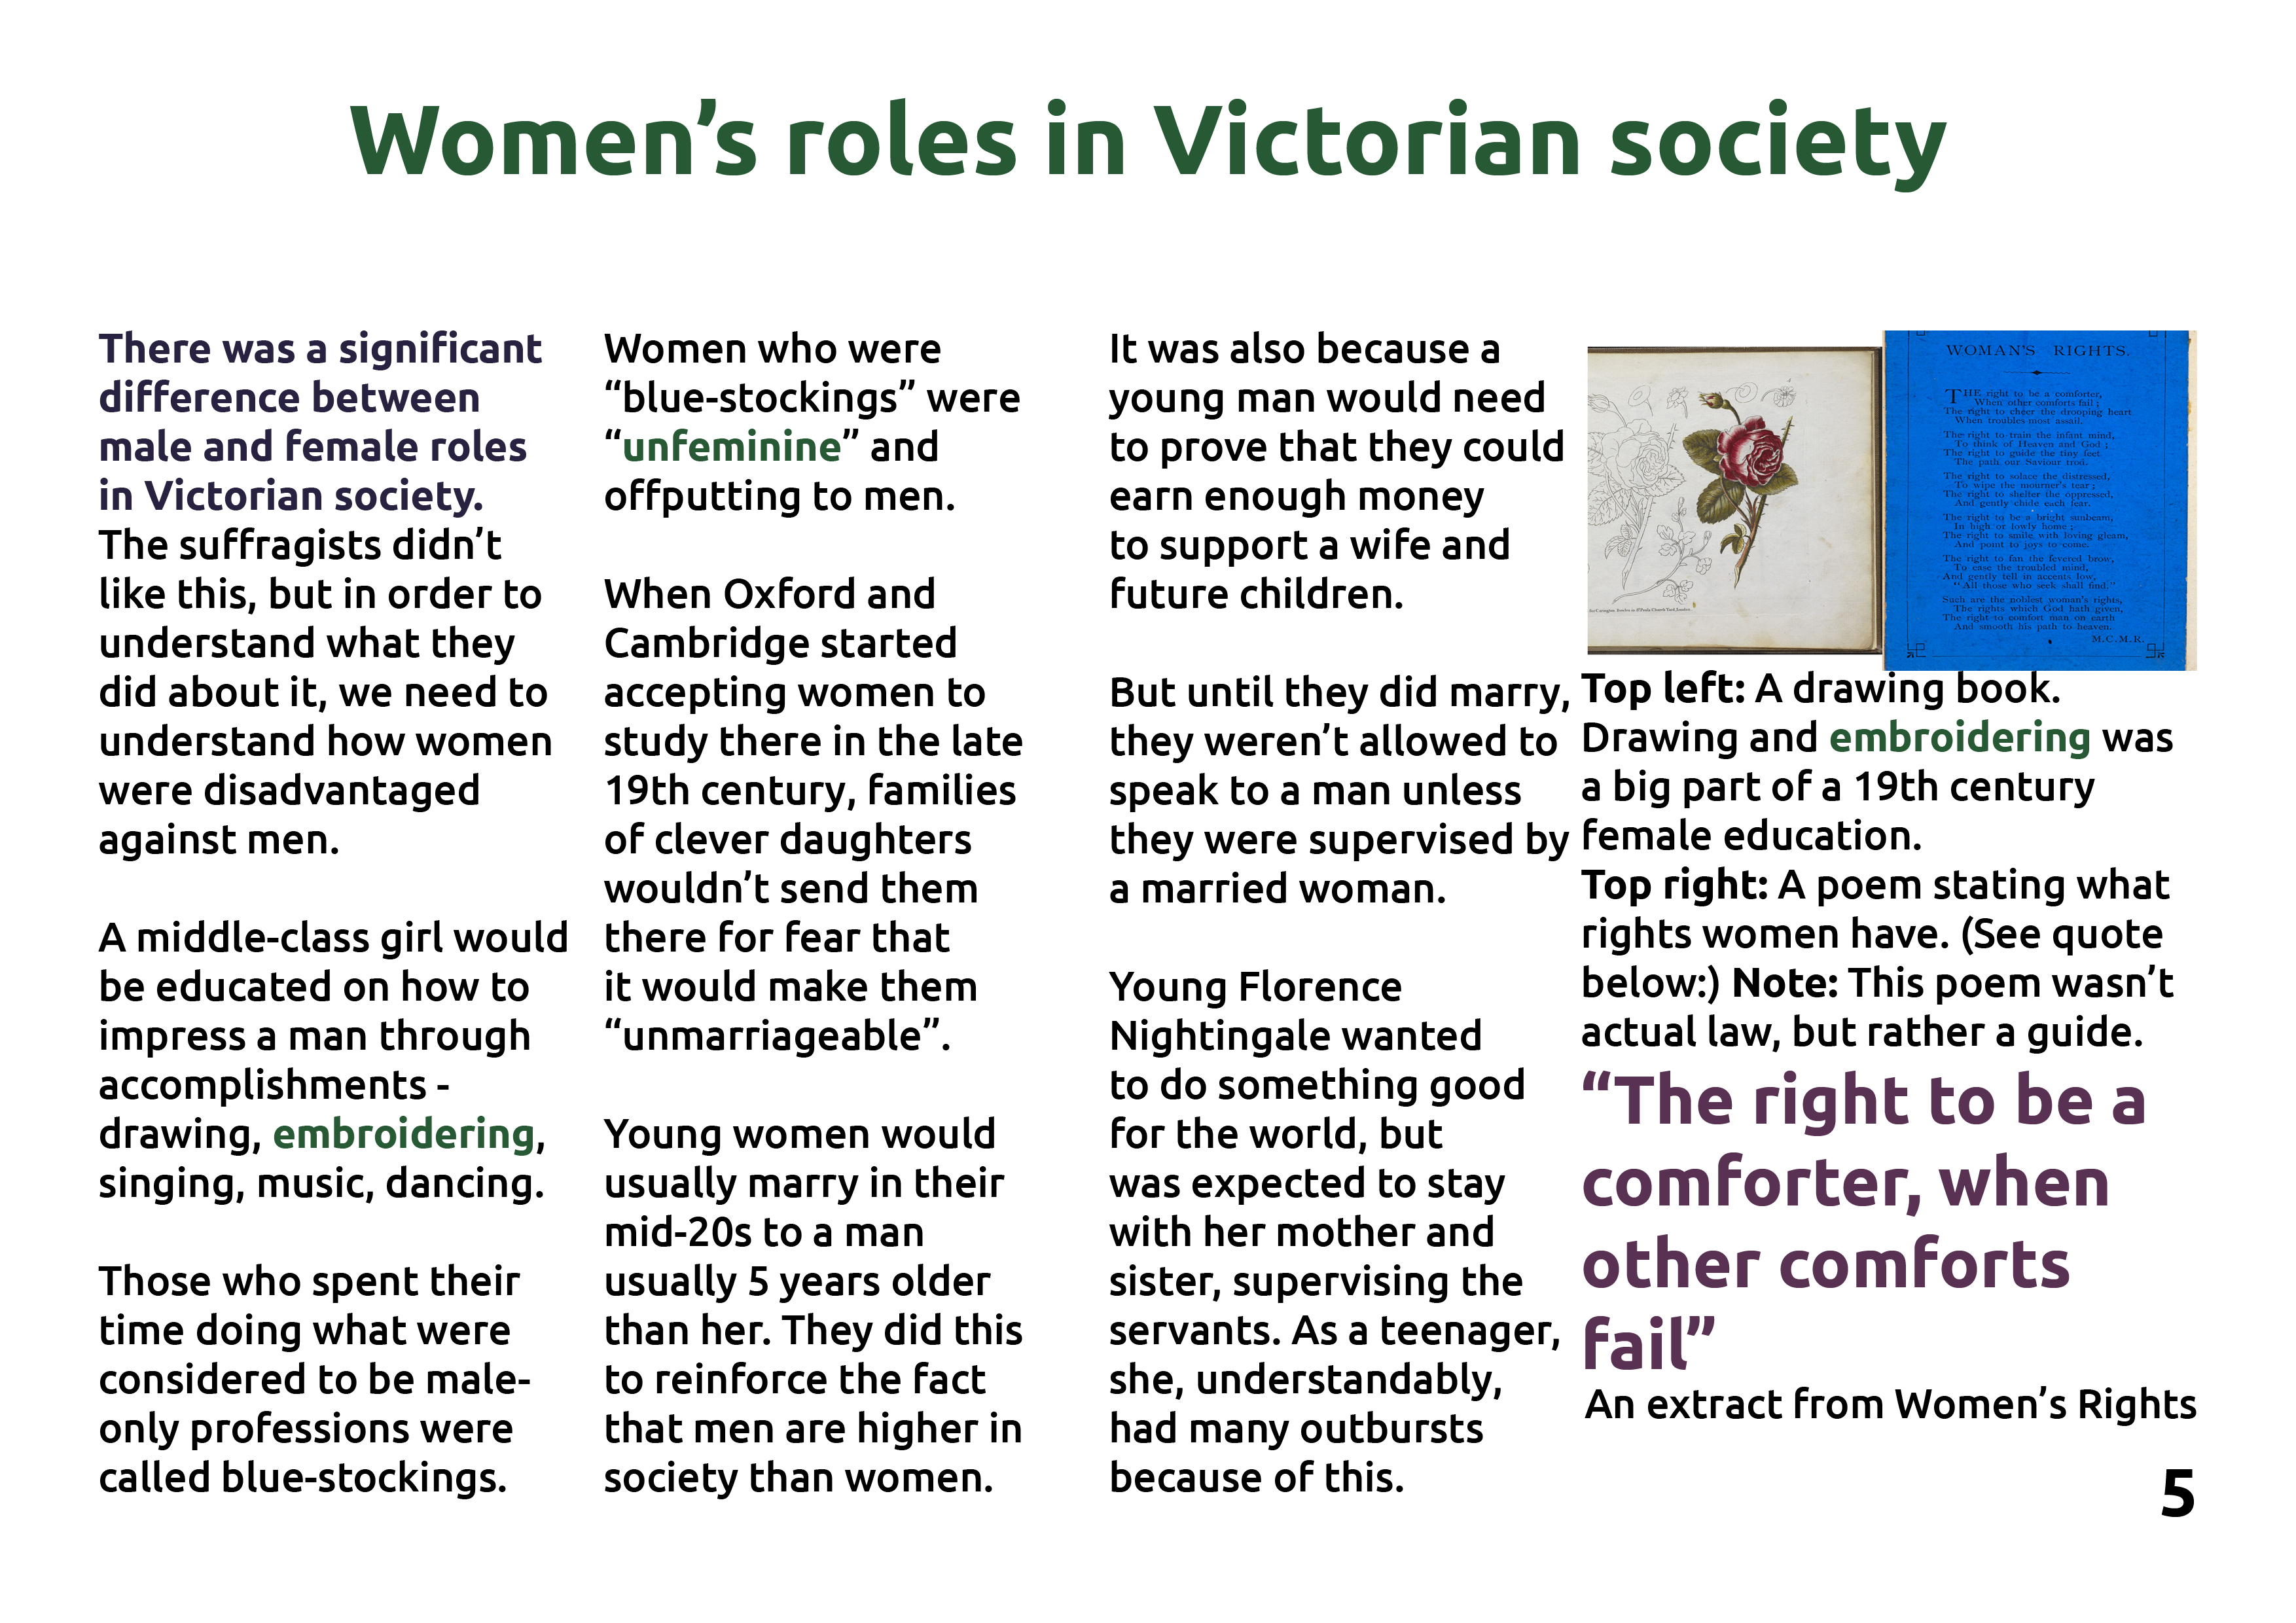 A page of the book about women's roles in Victorian society.